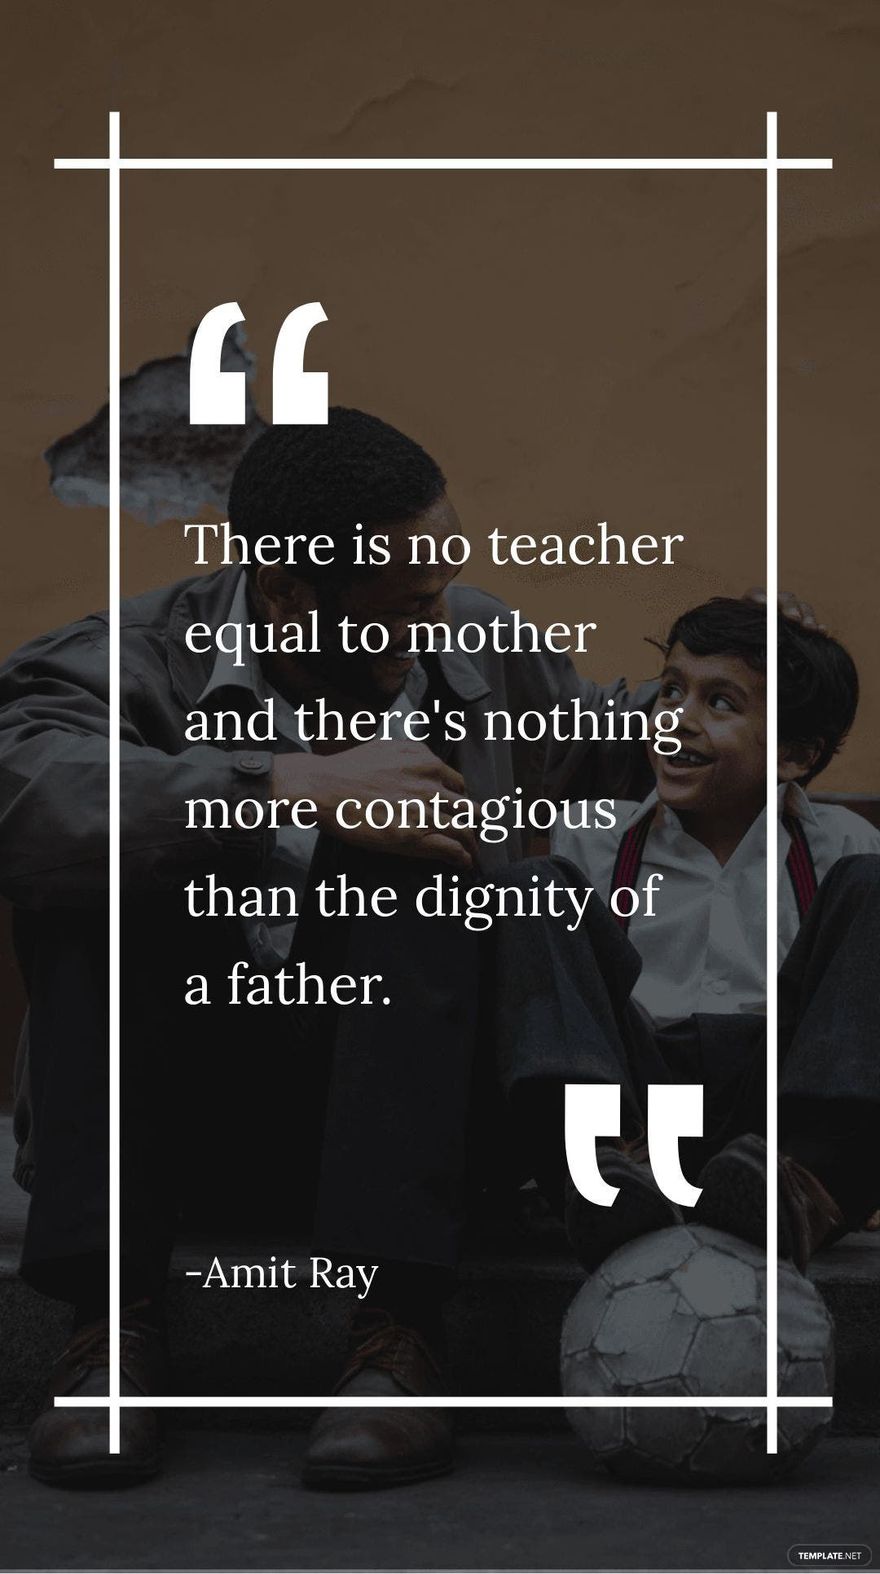 Amit Ray - There is no teacher equal to mother and there's nothing more contagious than the dignity of a father.